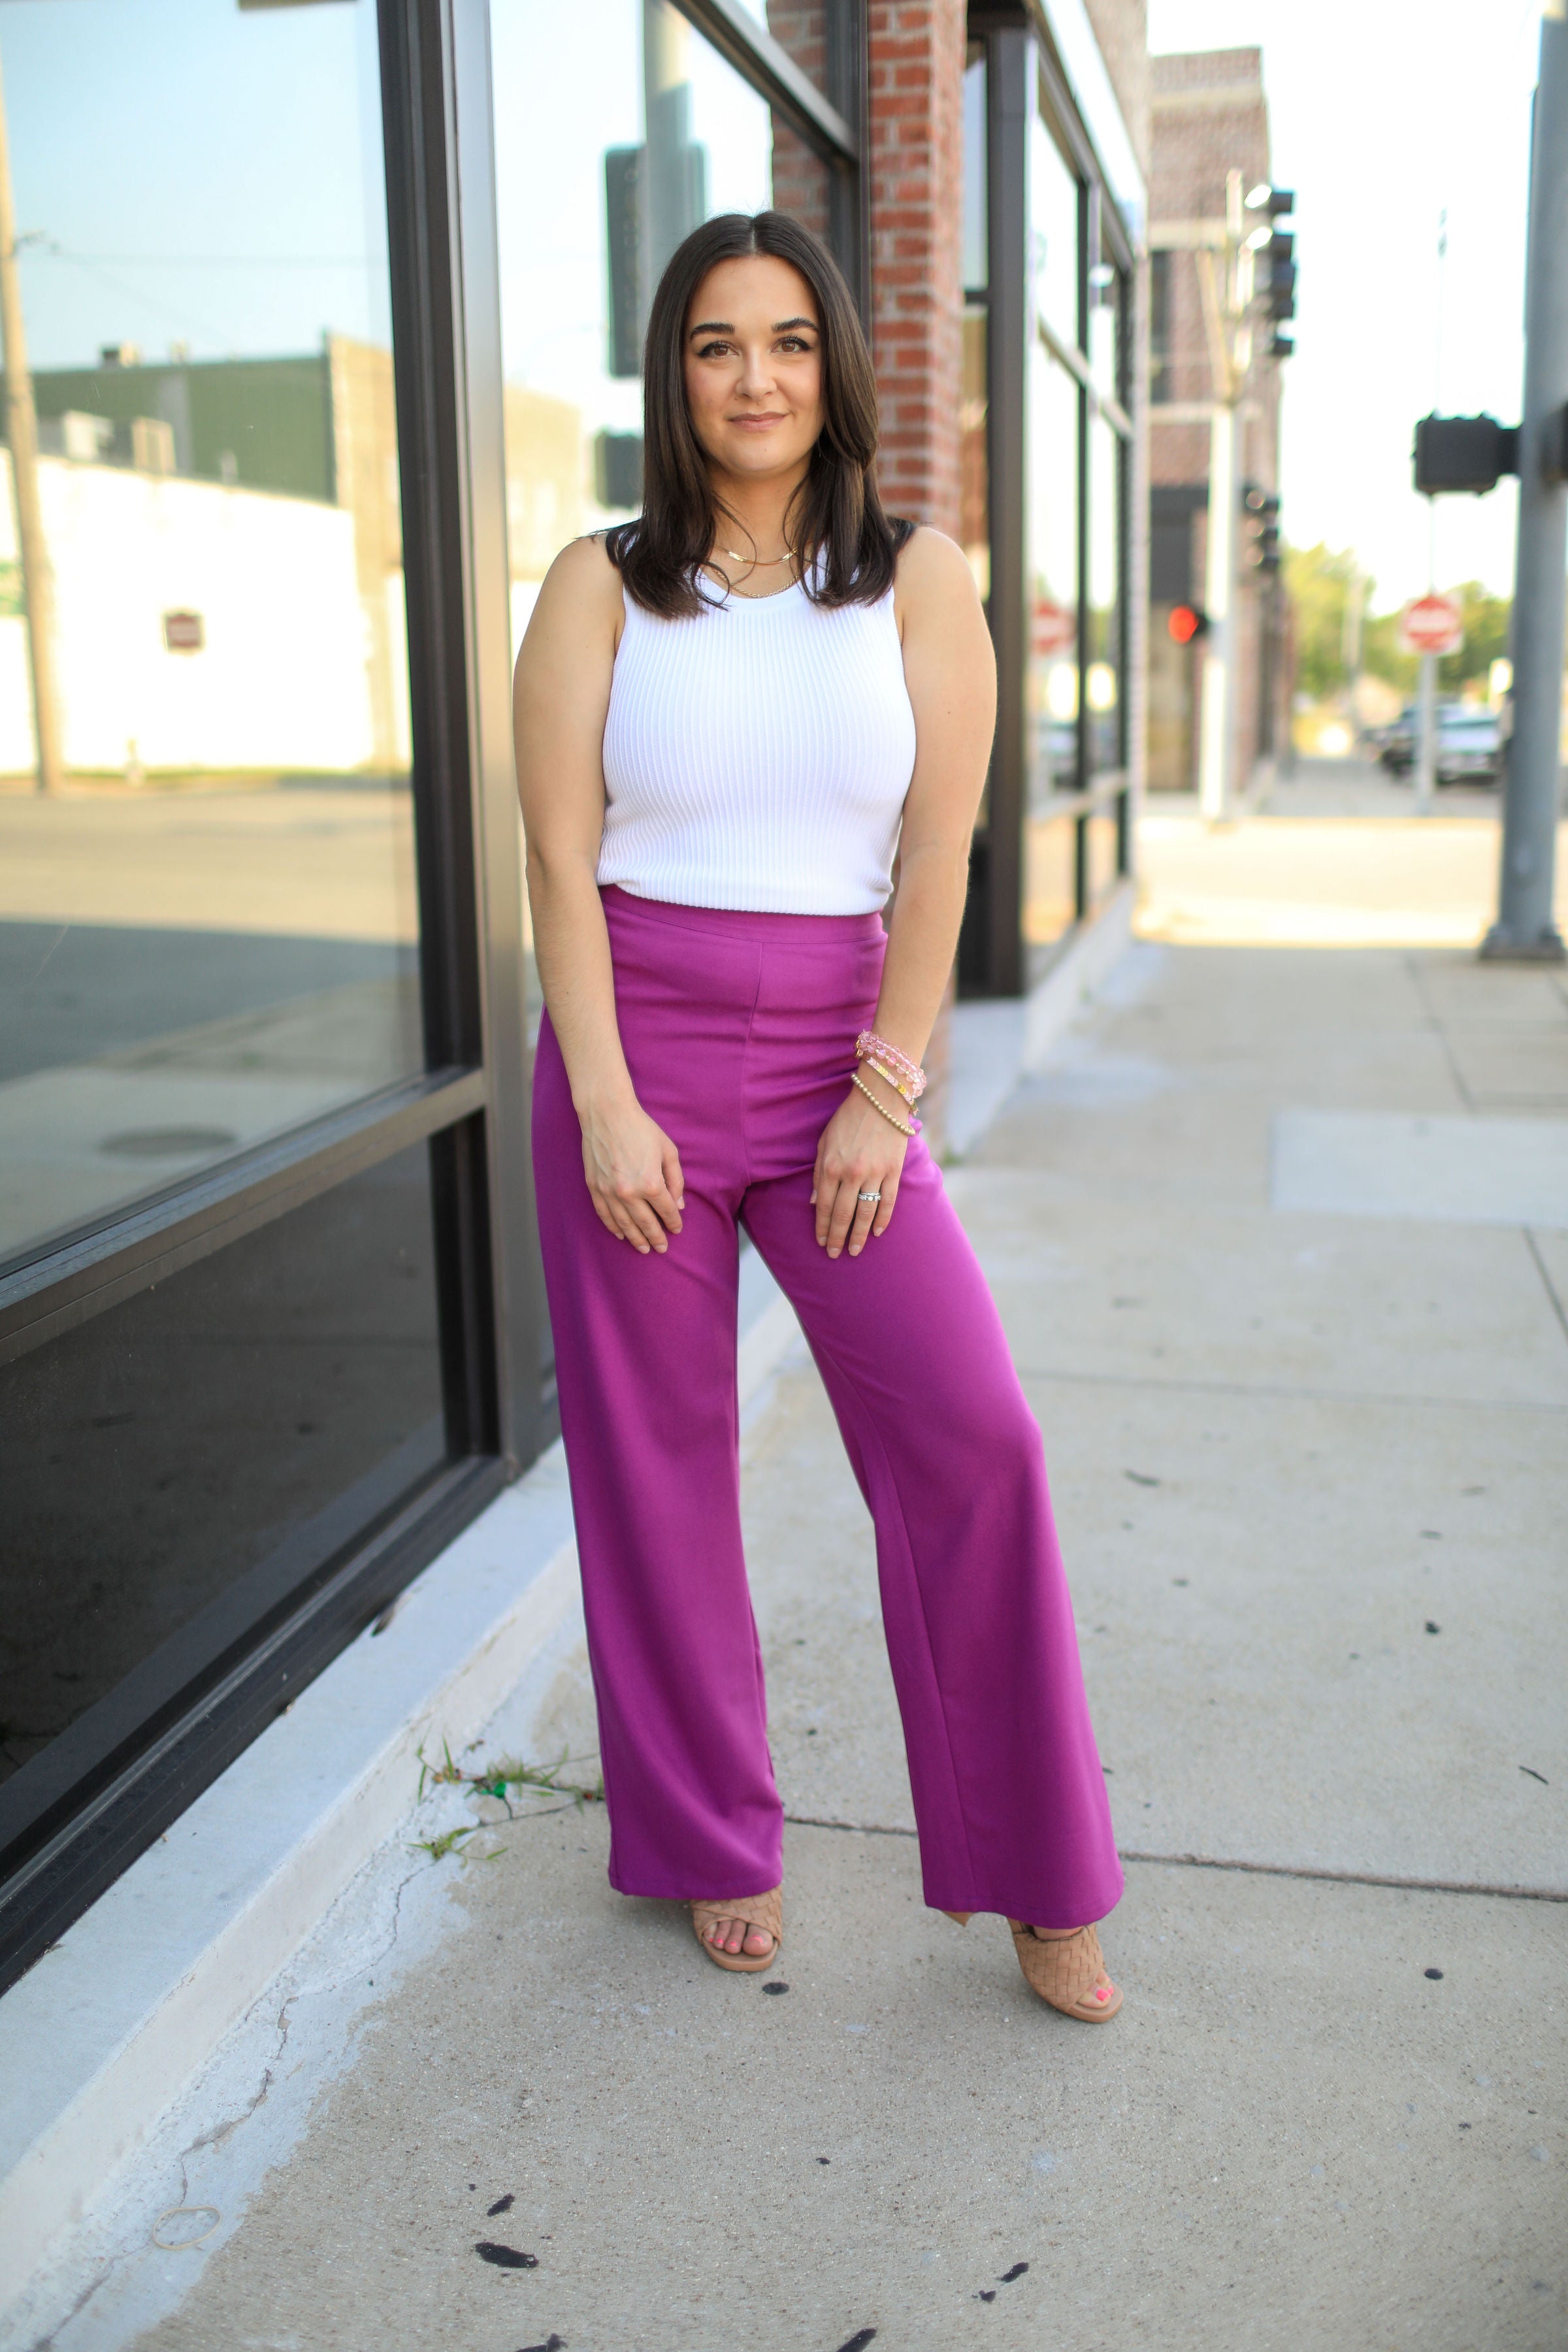 Express | Stylist Super High Waisted Pleated Wide Leg Pant in Purple |  Express Style Trial